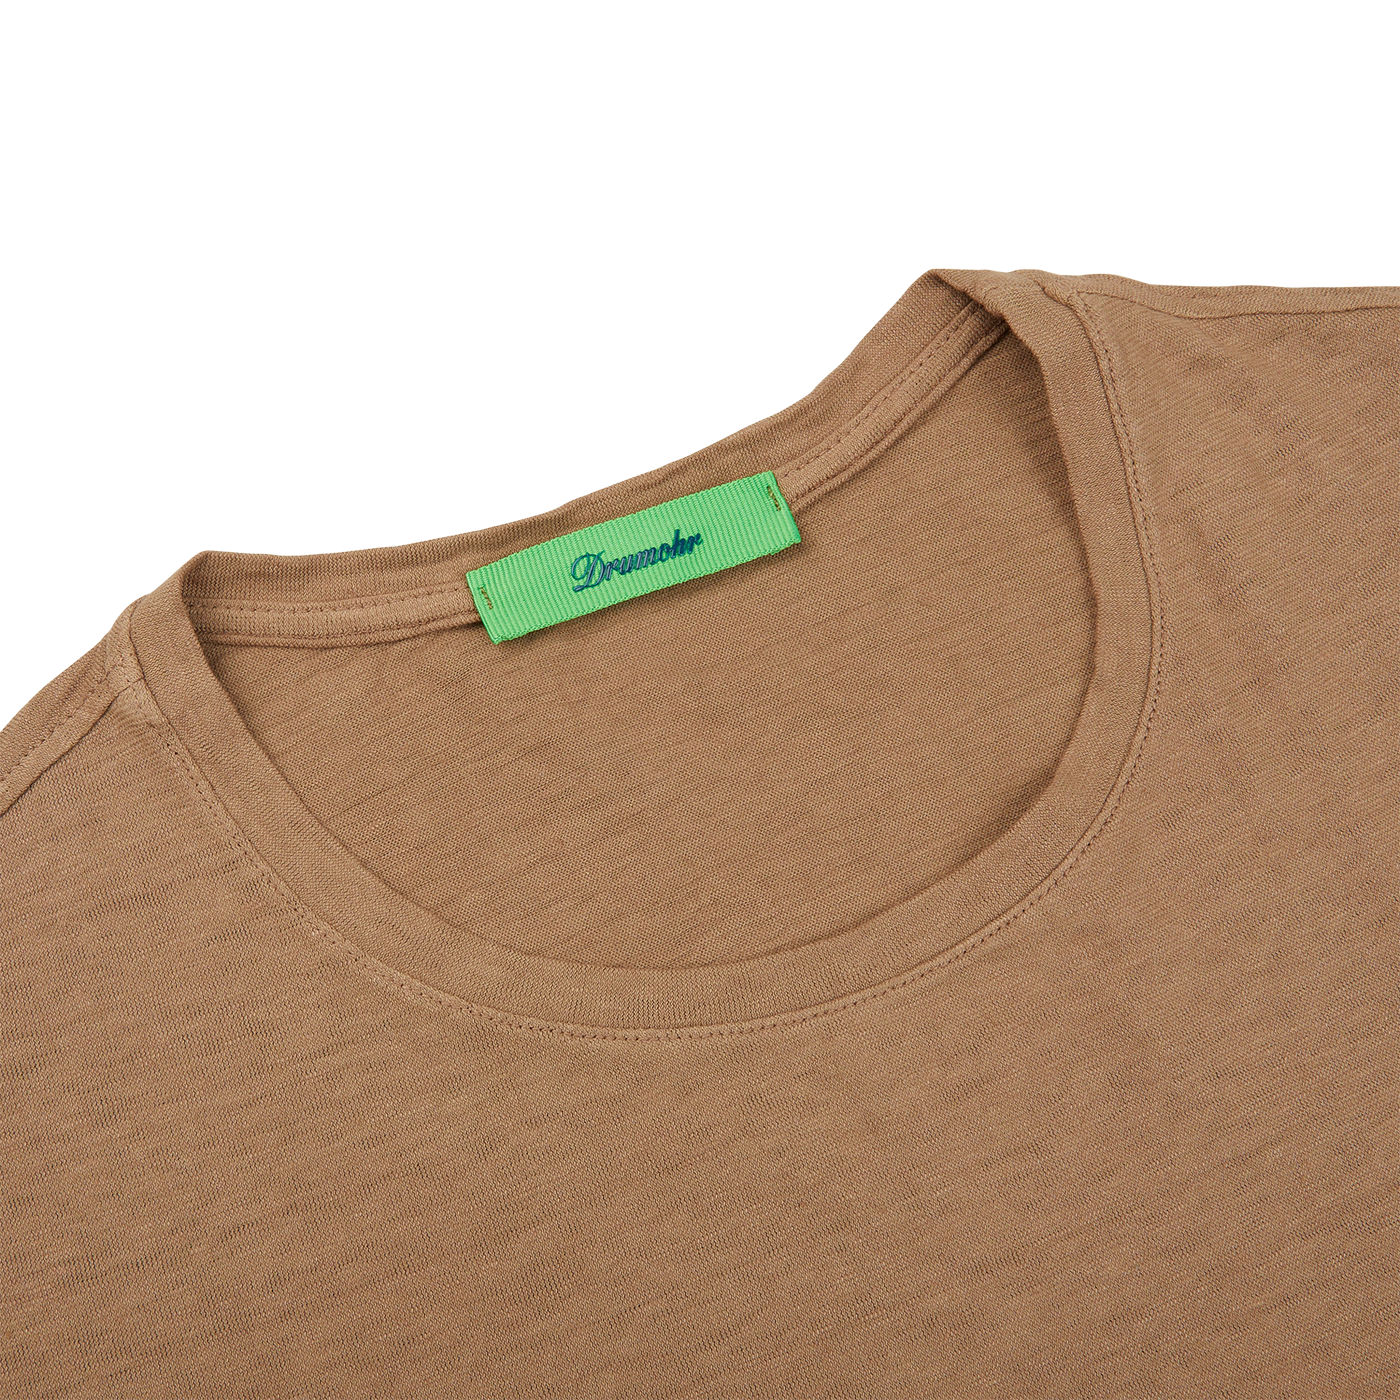 A slim fit Coffee Brown Cotton Linen T-shirt with a green label by Drumohr.